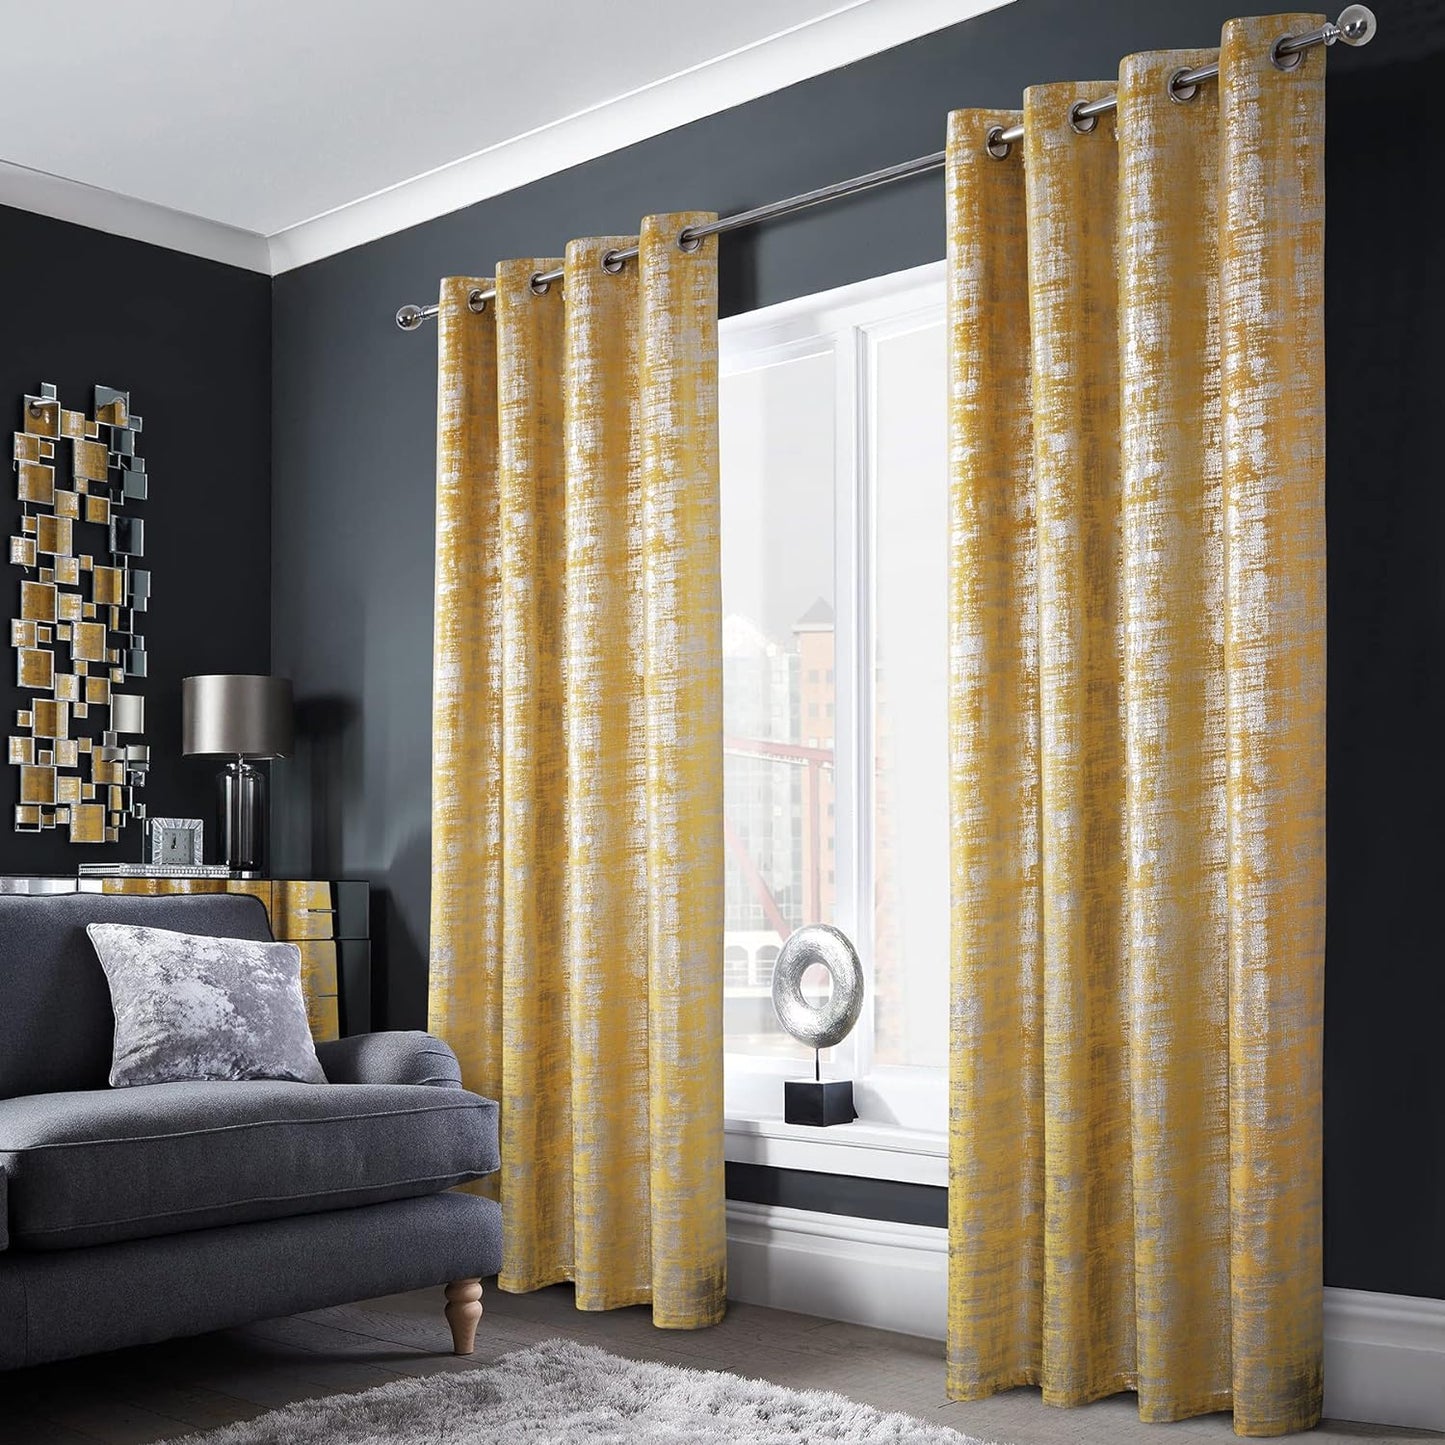 Always4U Soft Velvet Curtains 95 Inch Length Luxury Bedroom Curtains Gold Foil Print Window Curtains for Living Room 1 Panel White  always4u Yellow (Silver Print) 2 Panels: 52''W*84''L 